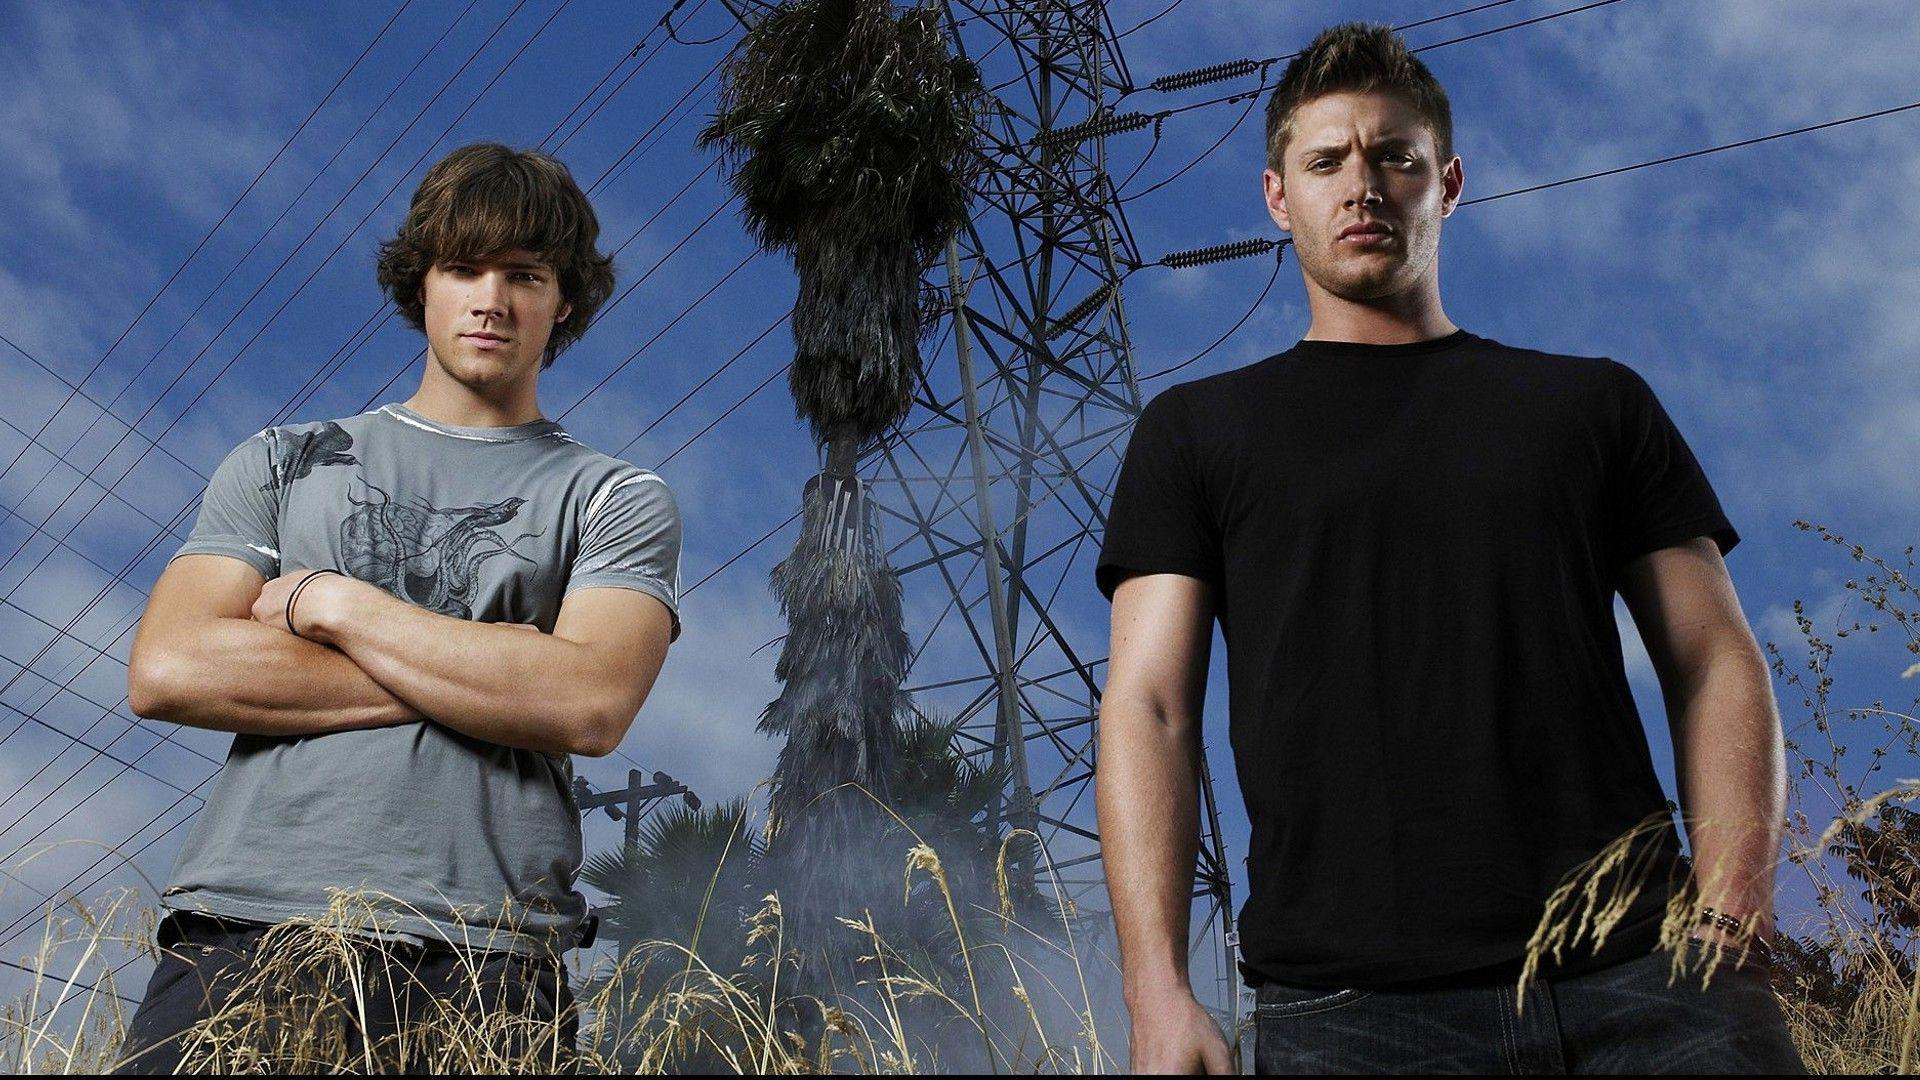 1920x1080 Download wallpaper for 540x960 resolution | Sam and Dean Winchester Supernatural | other | Wallpaper Better